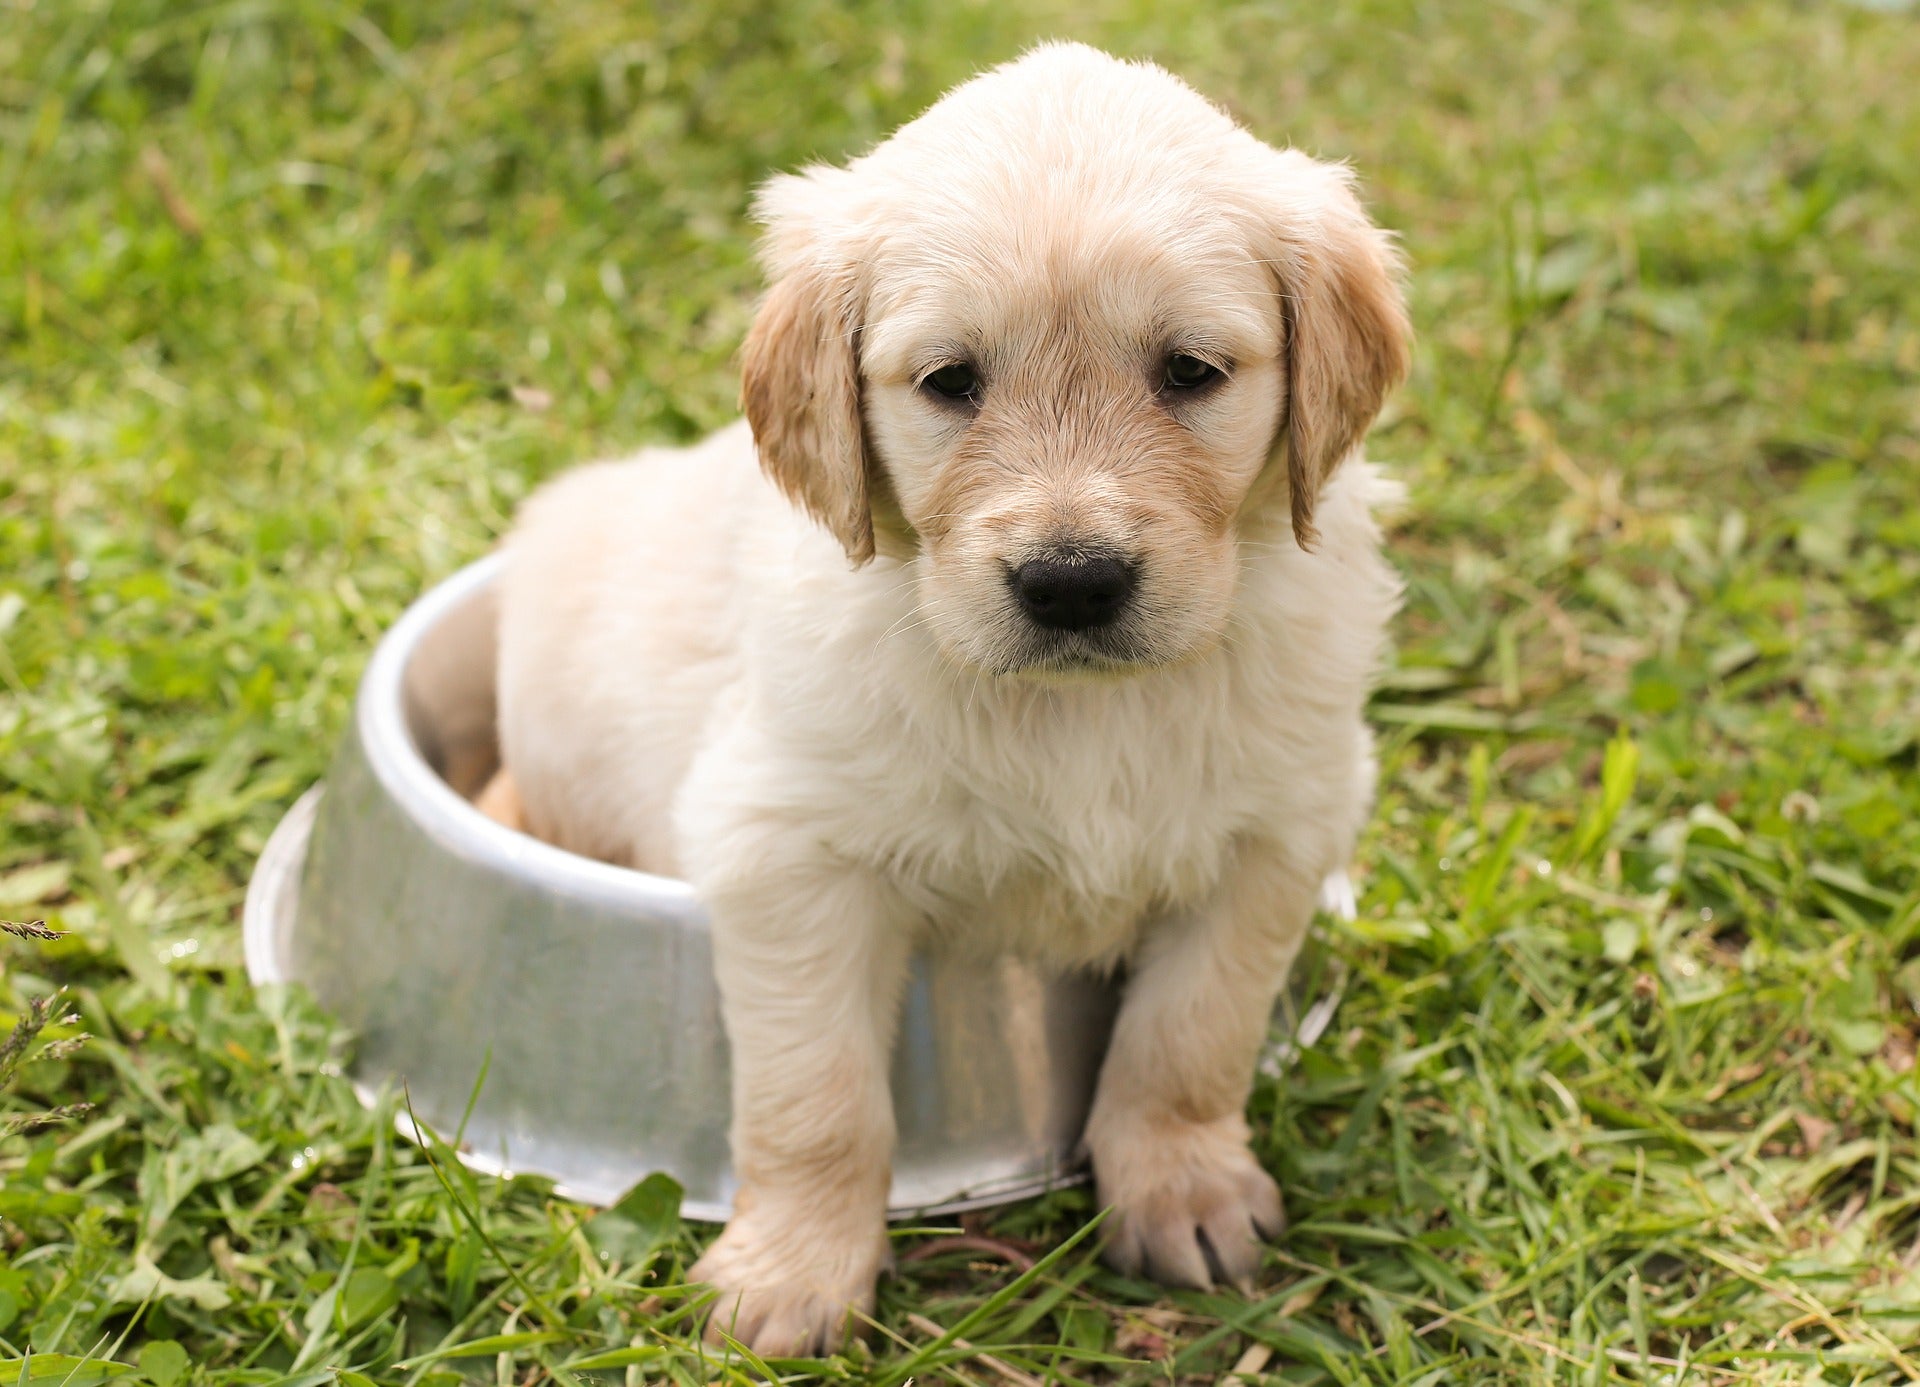 a golden retriever puppy sitting in a stainless steel water bowl